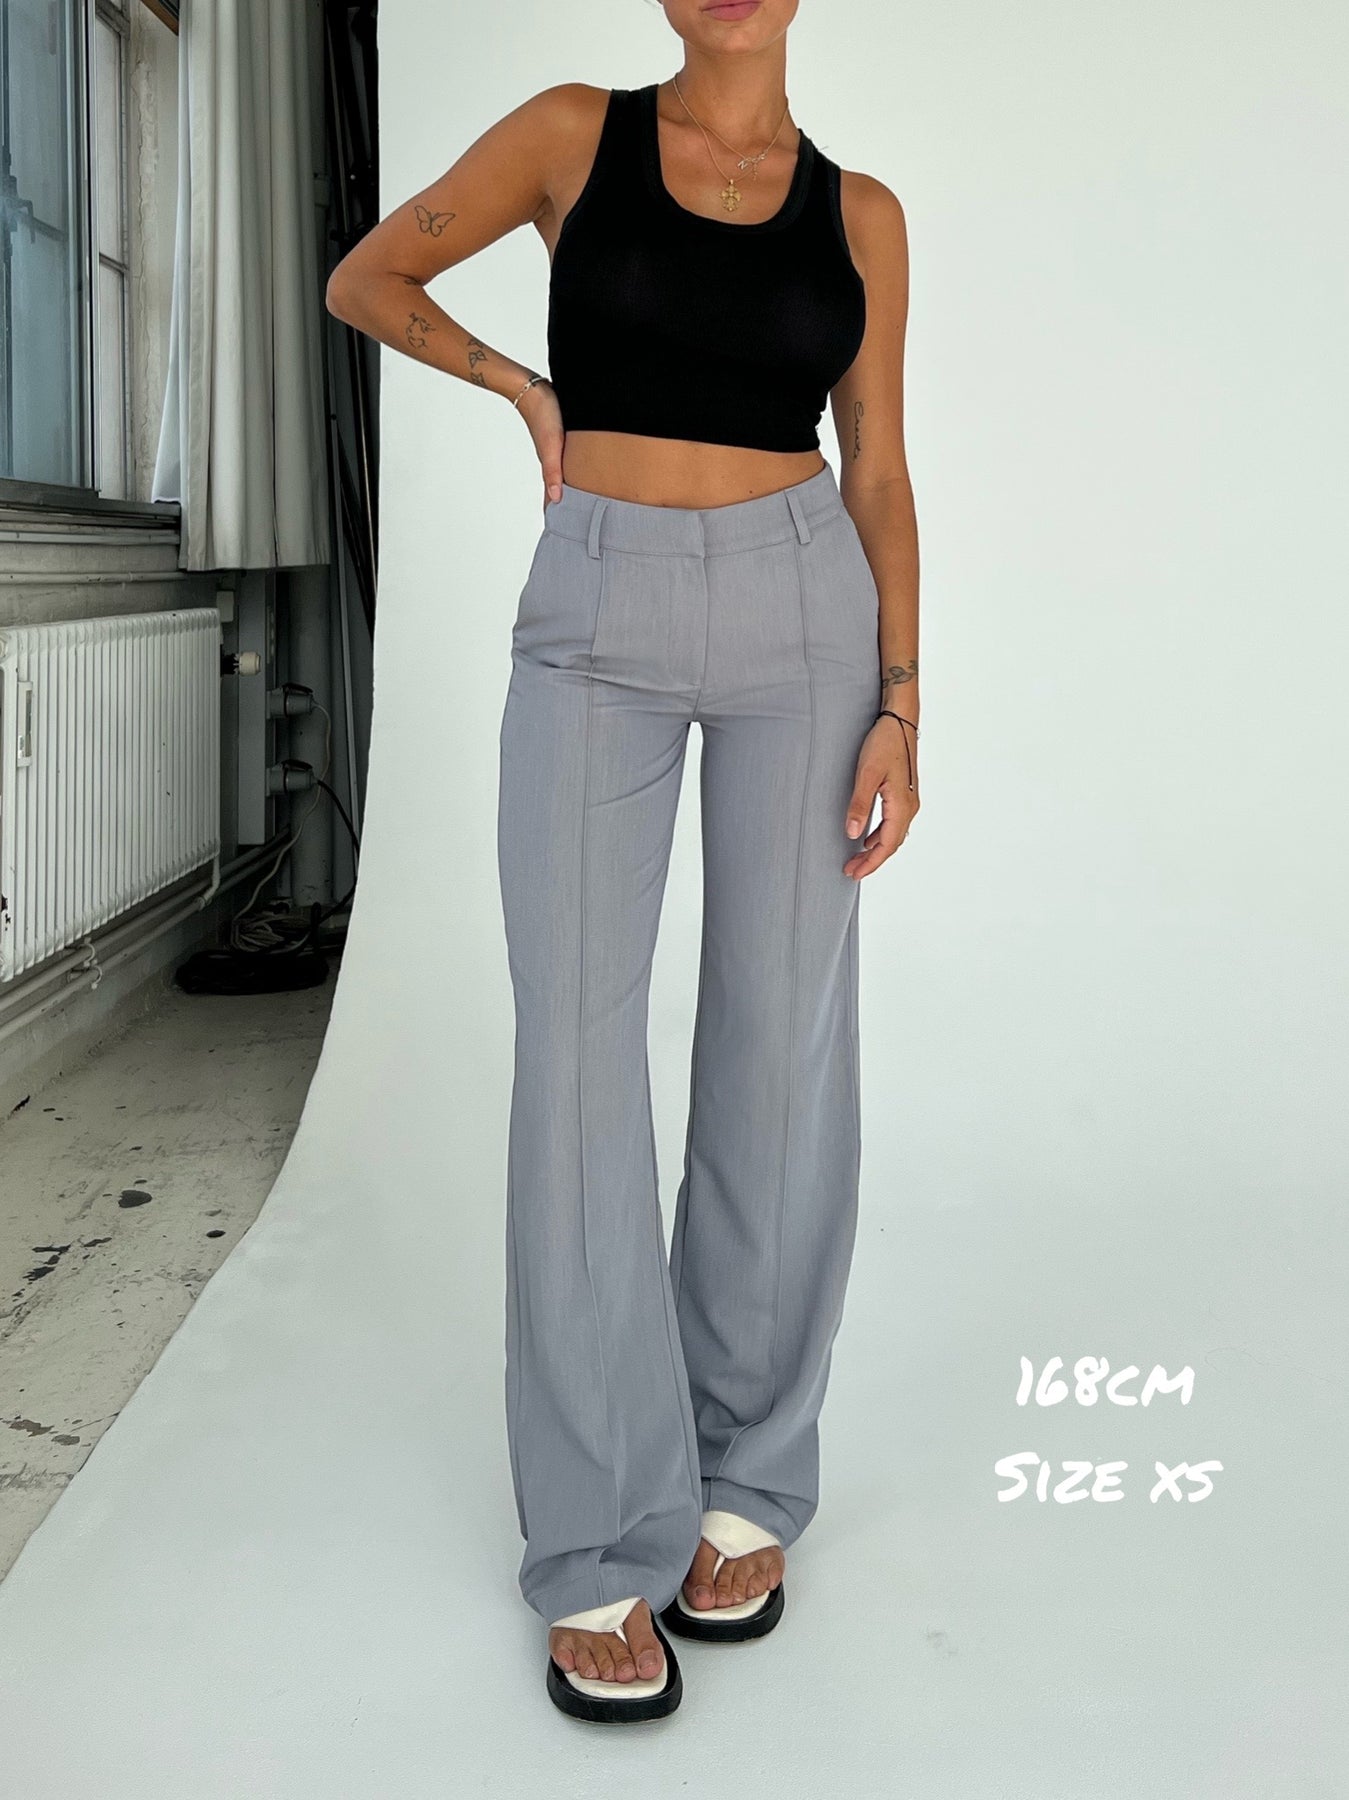 Wide Leg Pants, Buy pants with width & perfect fit